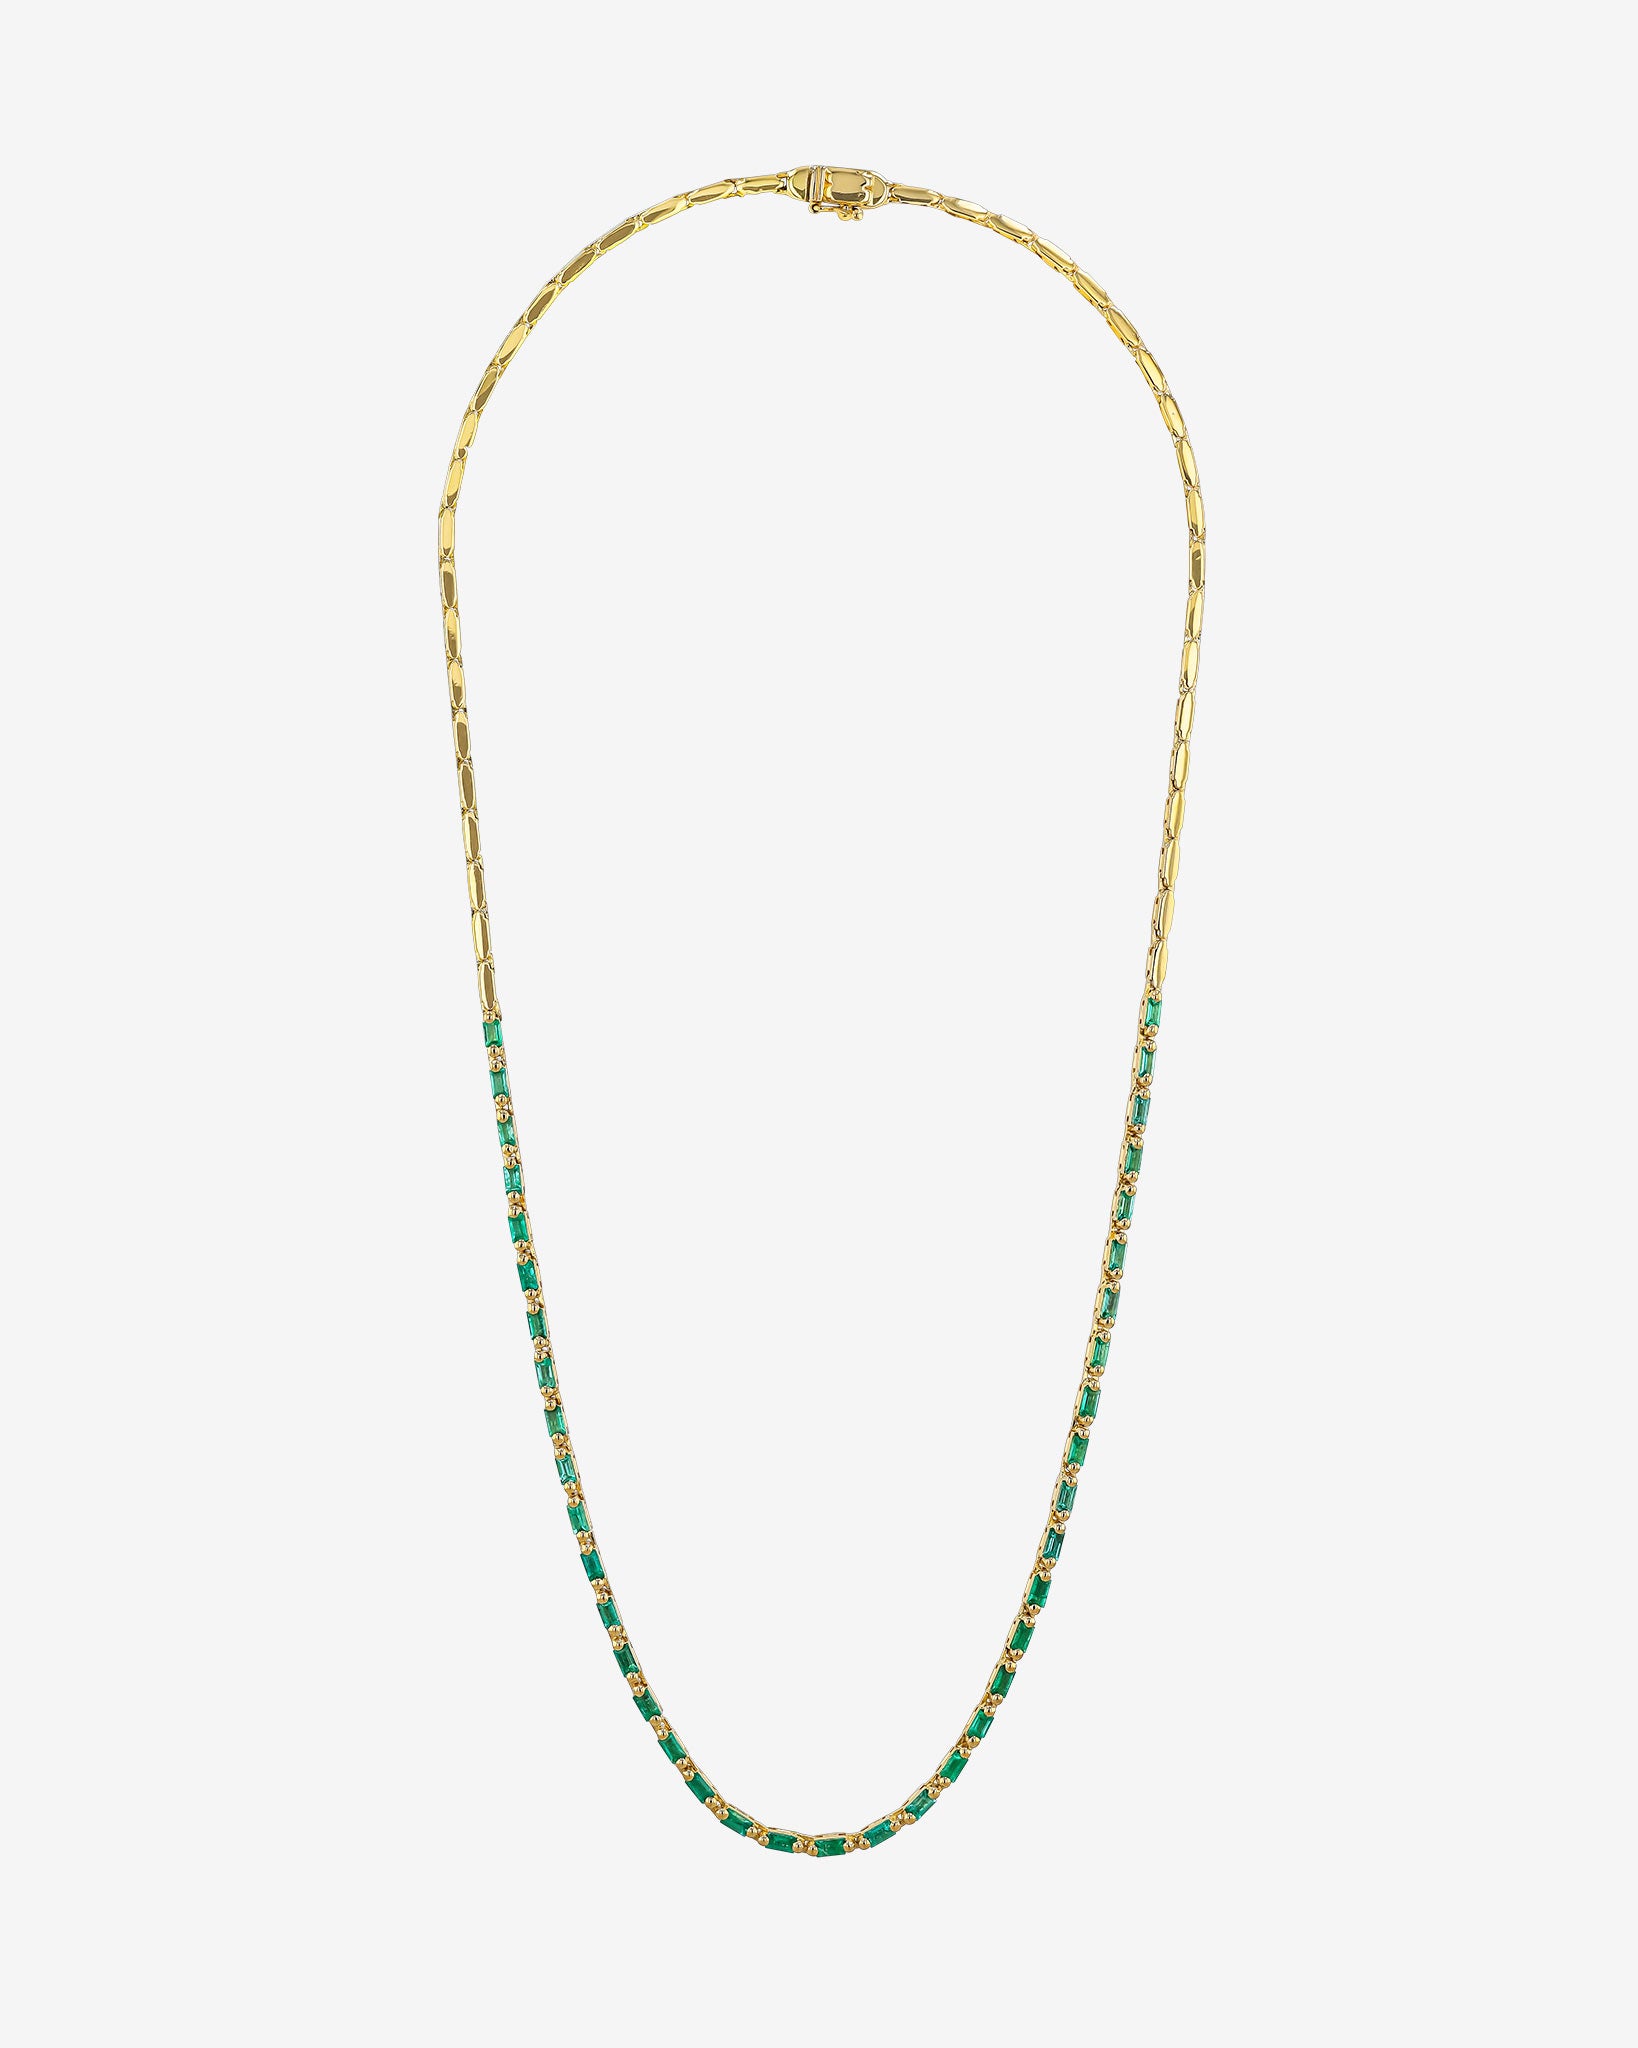 Suzanne Kalan Linear Half Emerald Tennis Necklace in 18k yellow gold